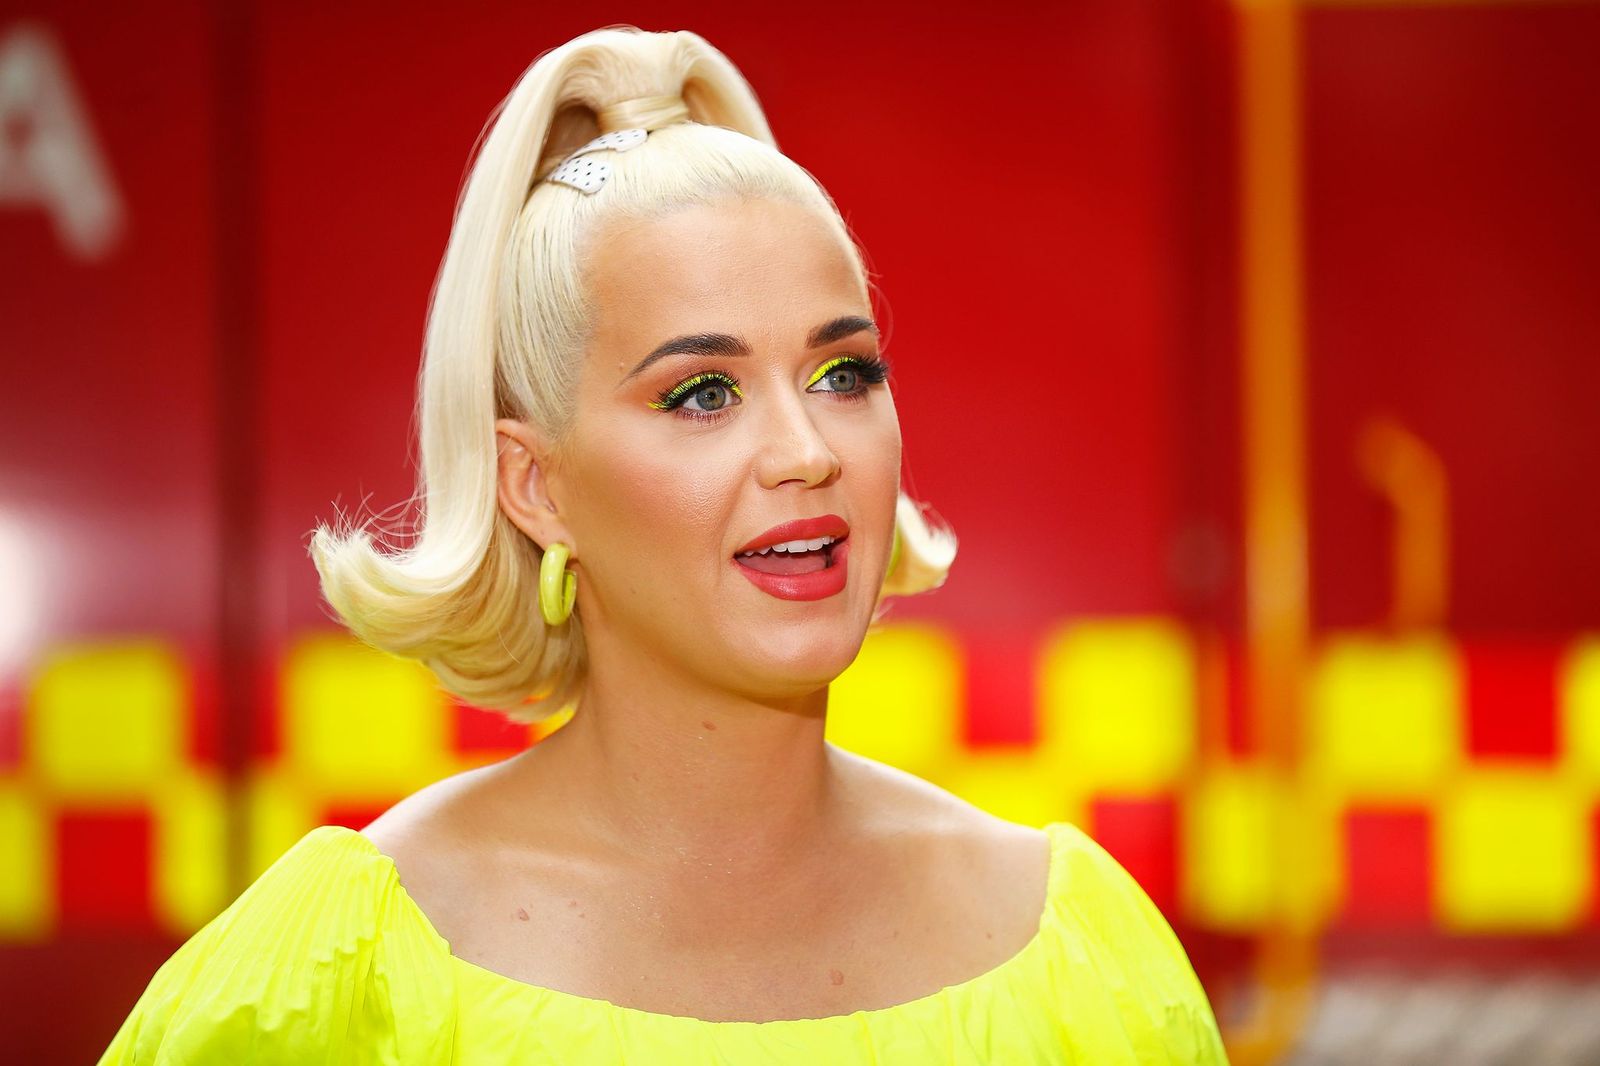 Katy Perry is photographed speaking to media on March 11, 2020 | Photo: Getty Images